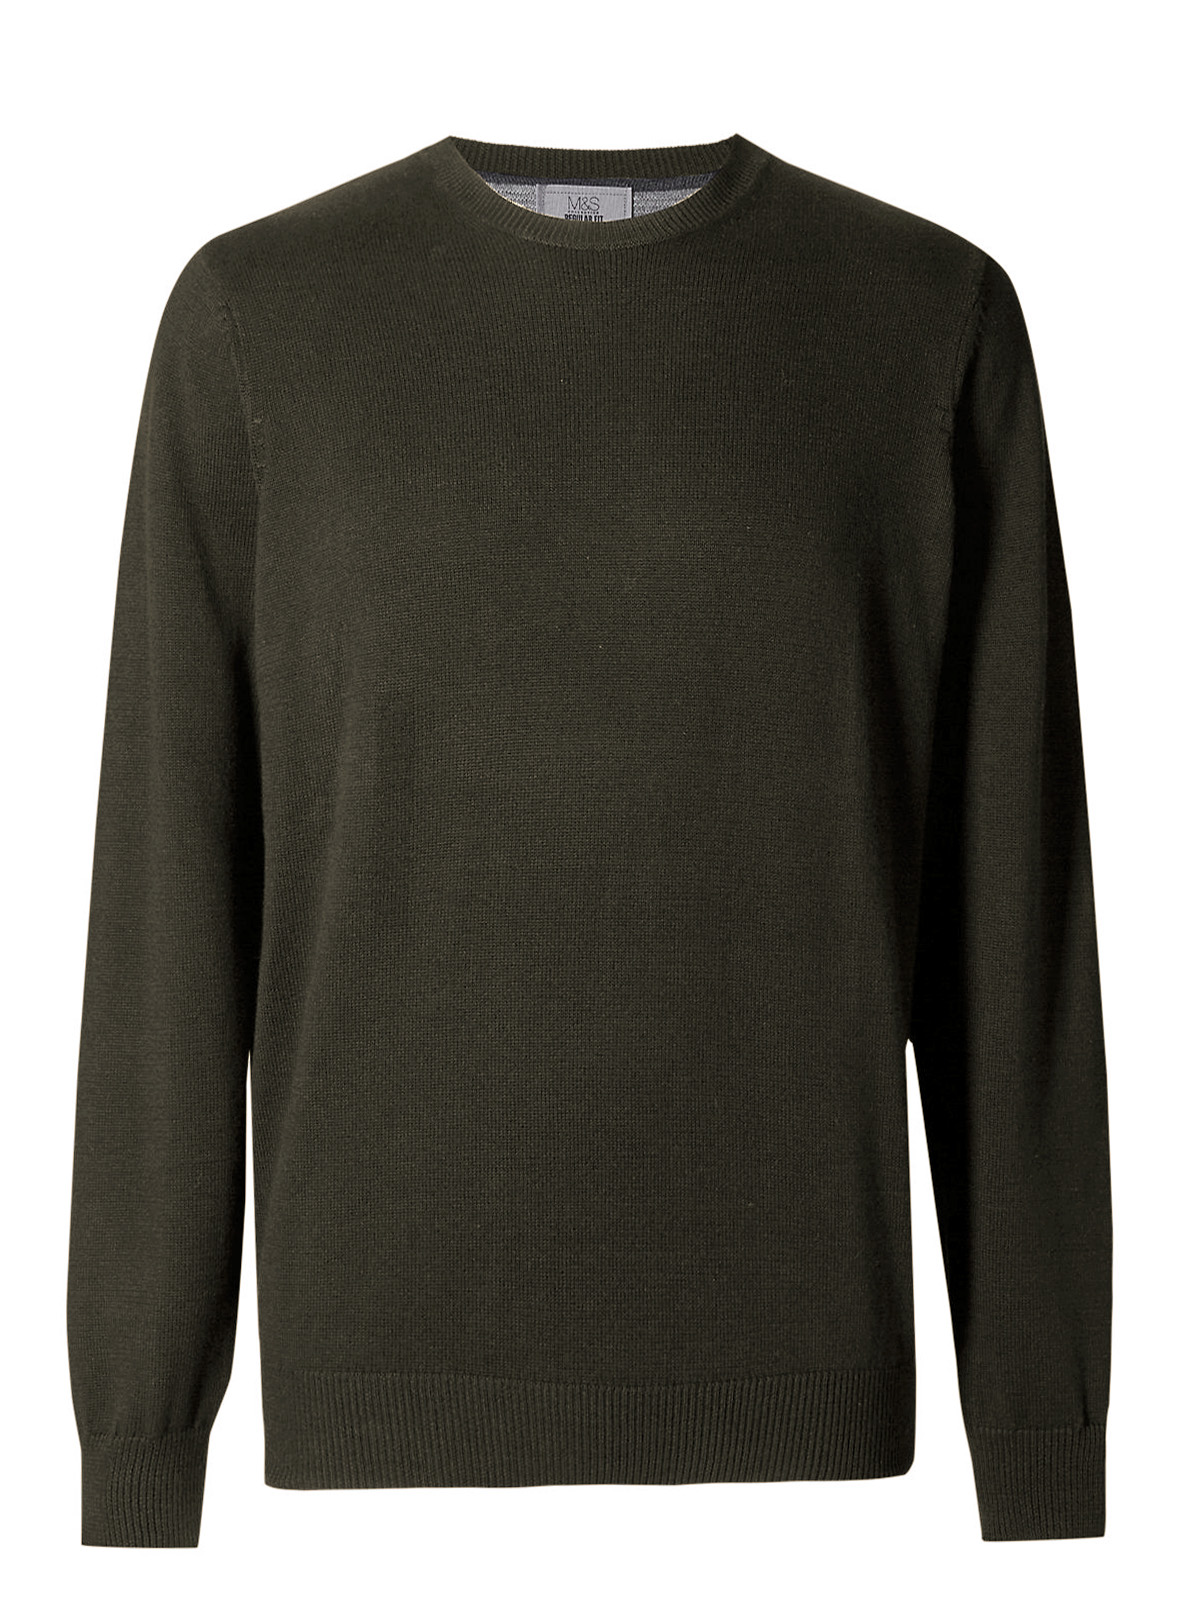 Marks and Spencer - - M&5 DARK-GREEN Pure Cotton Crew Neck Jumper ...